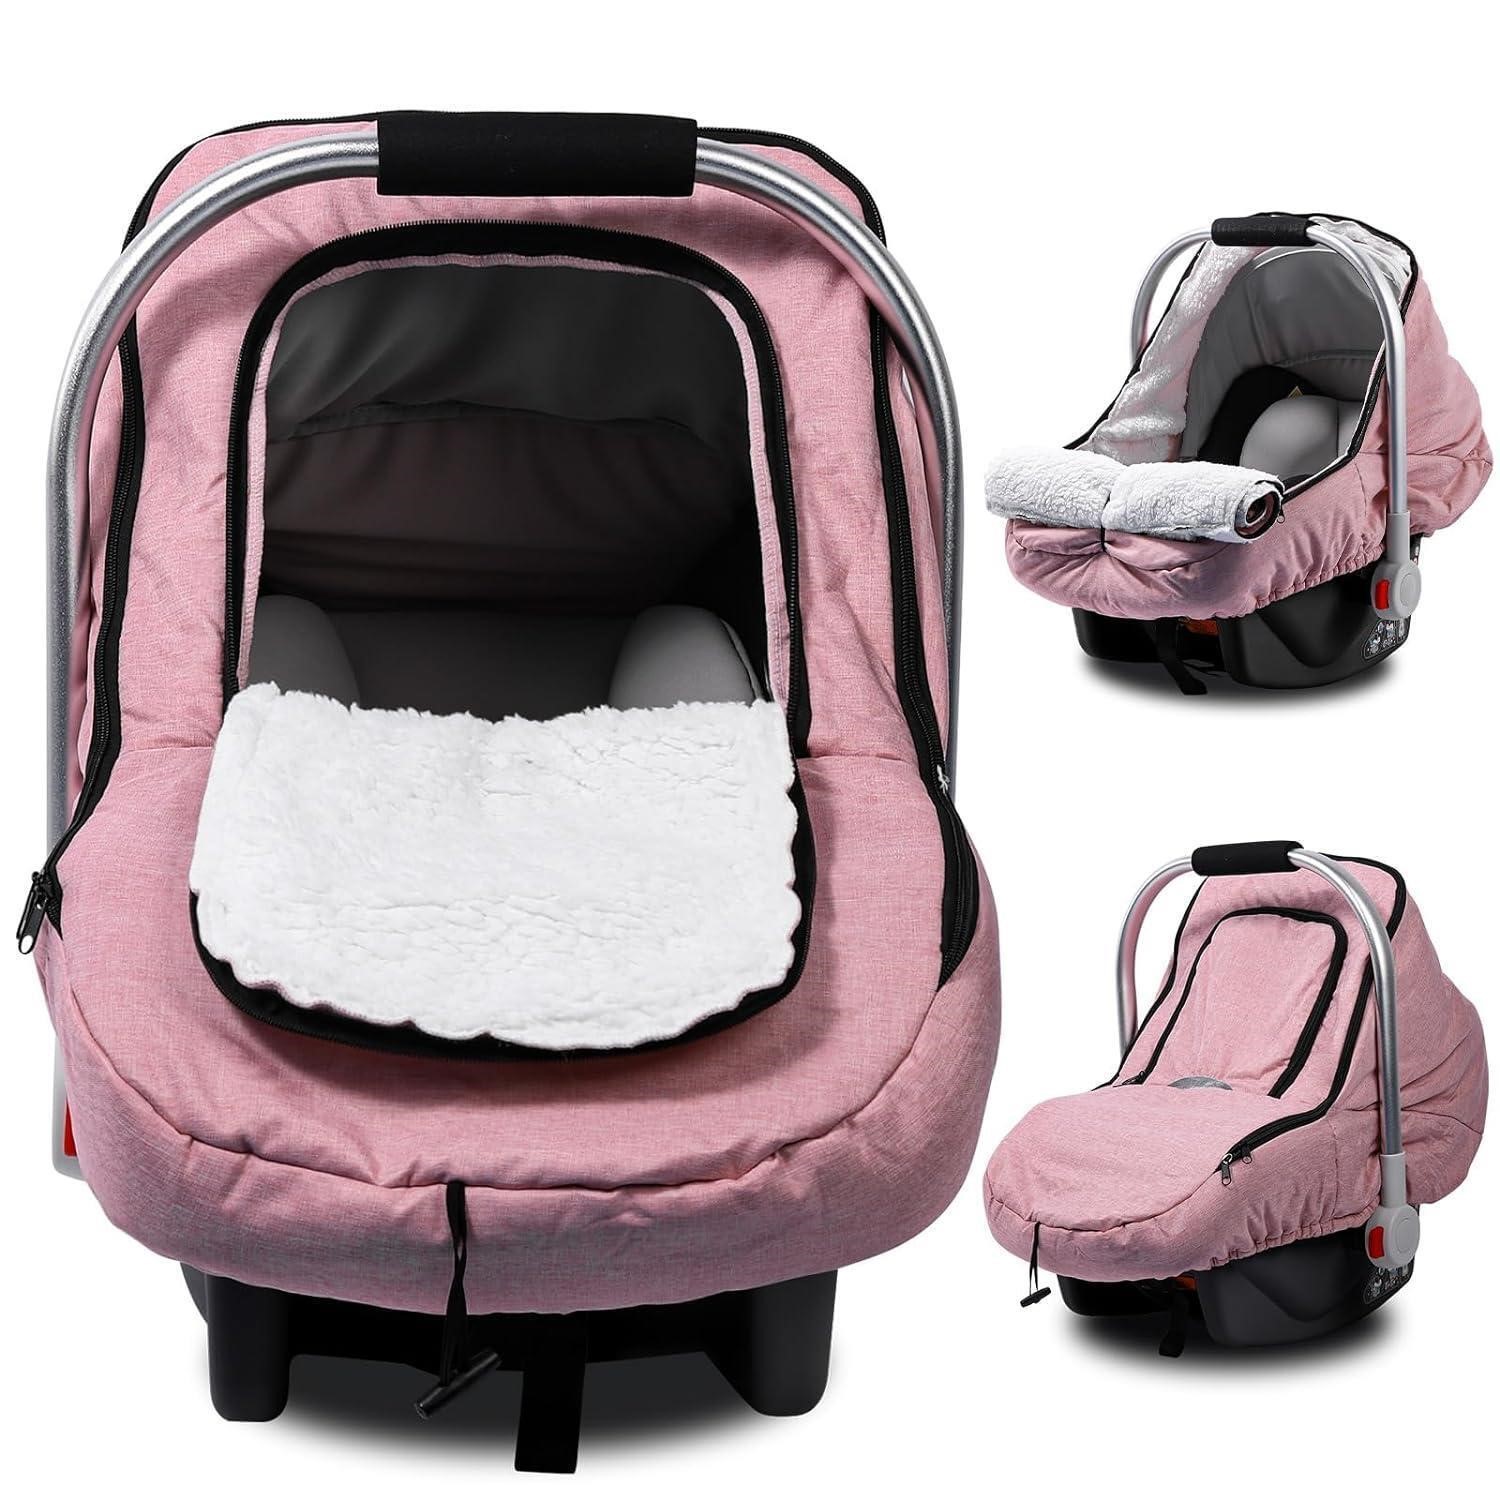 Fleece Baby Car Seat Cover with Vent